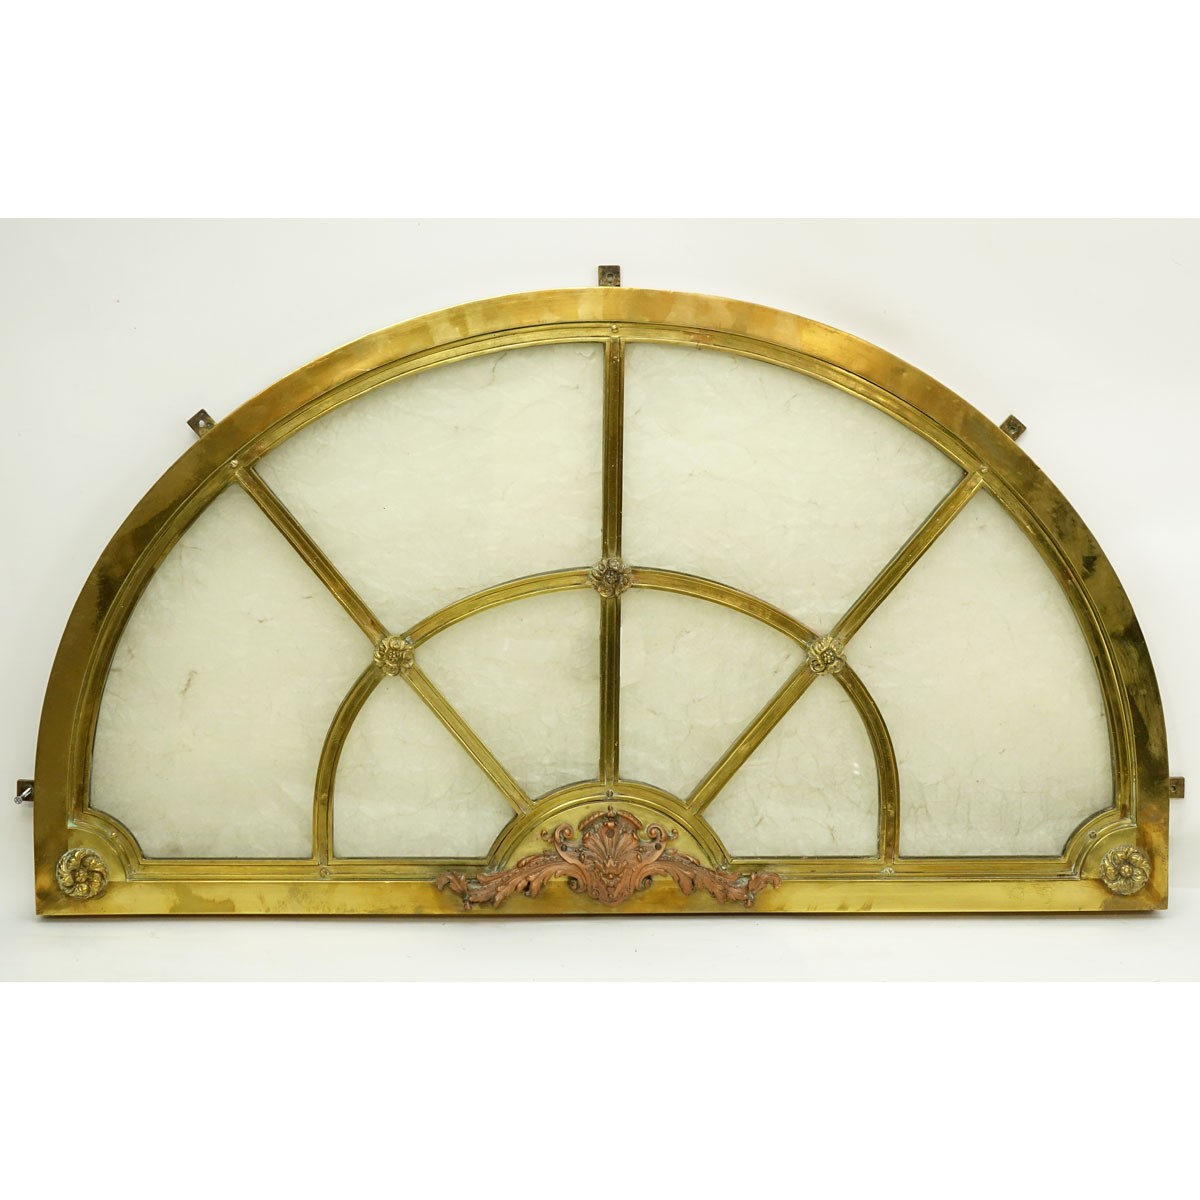 Antique Gilt Bronze and Glass Transom. Rubbing to gilt, some spotting discoloration.